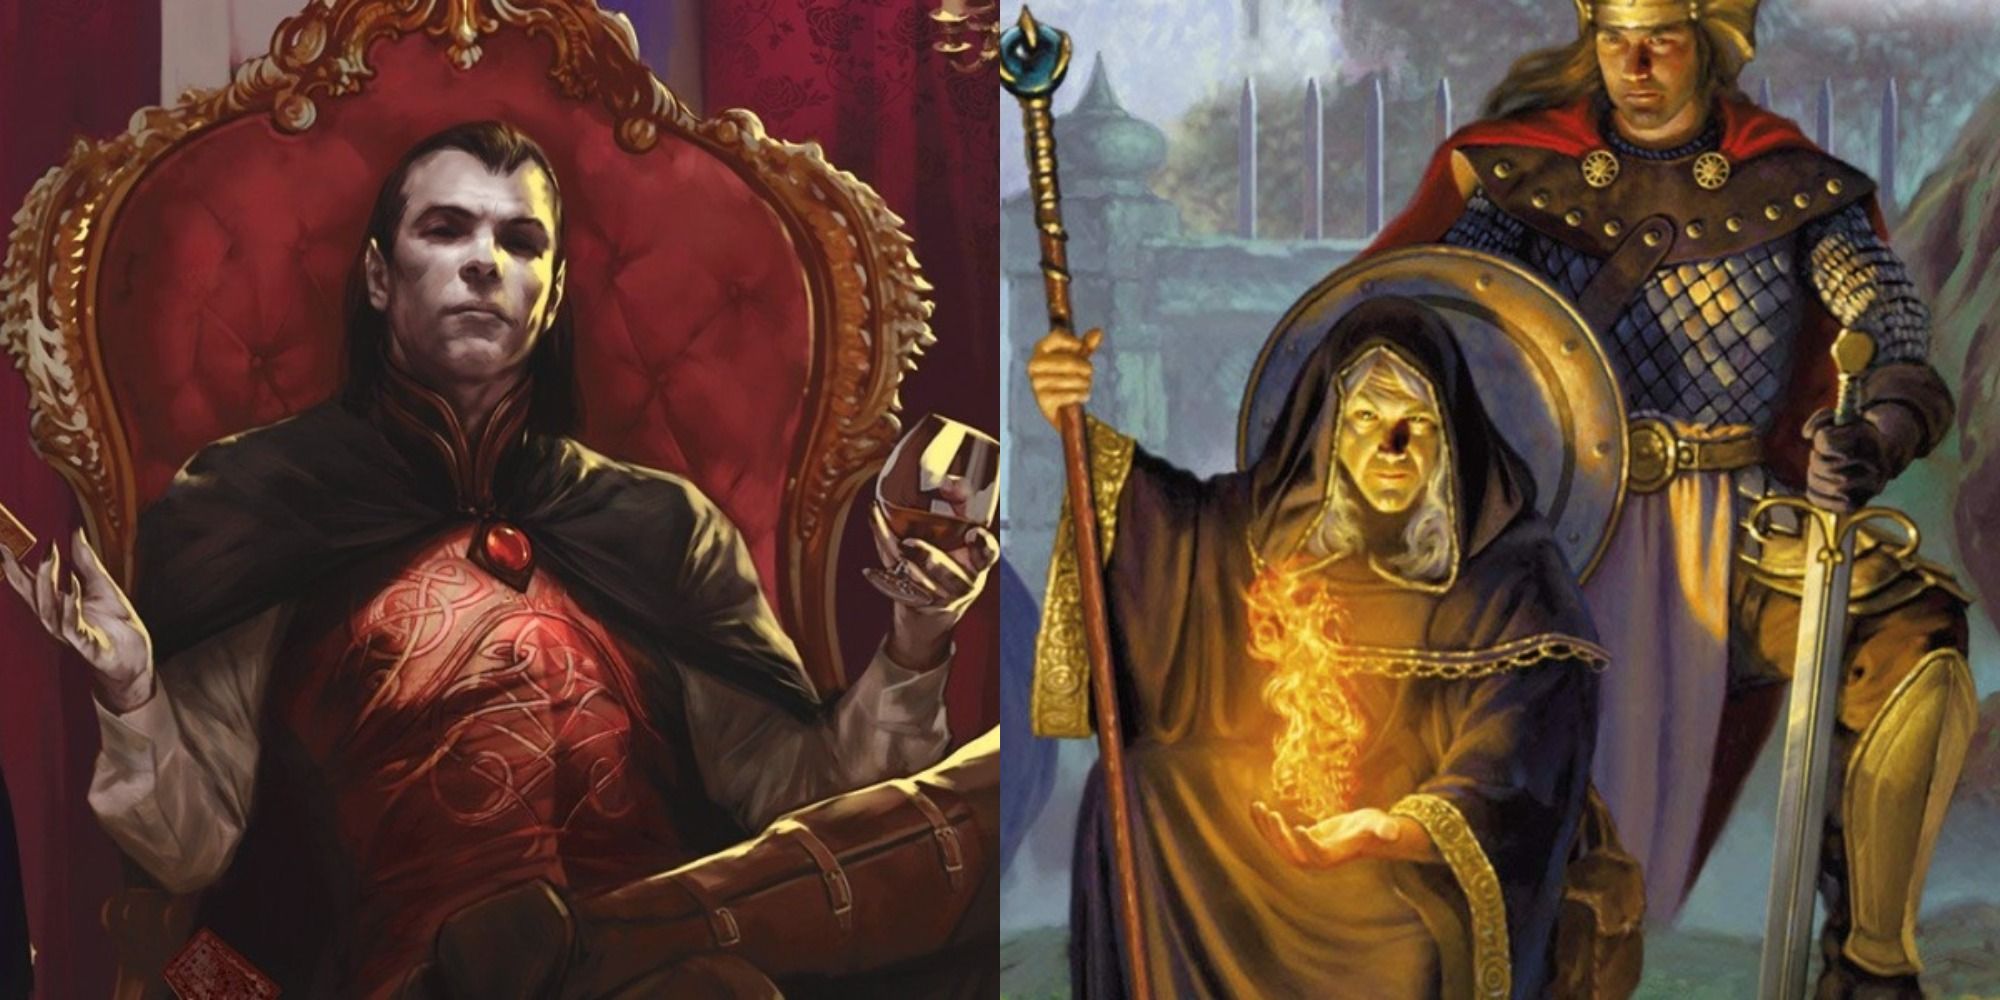 Split image: Strahd lounging in a chair dressed in red and black; Raistlin and Caramon Majere from Dragonlance, forming a fireball and holding a sword